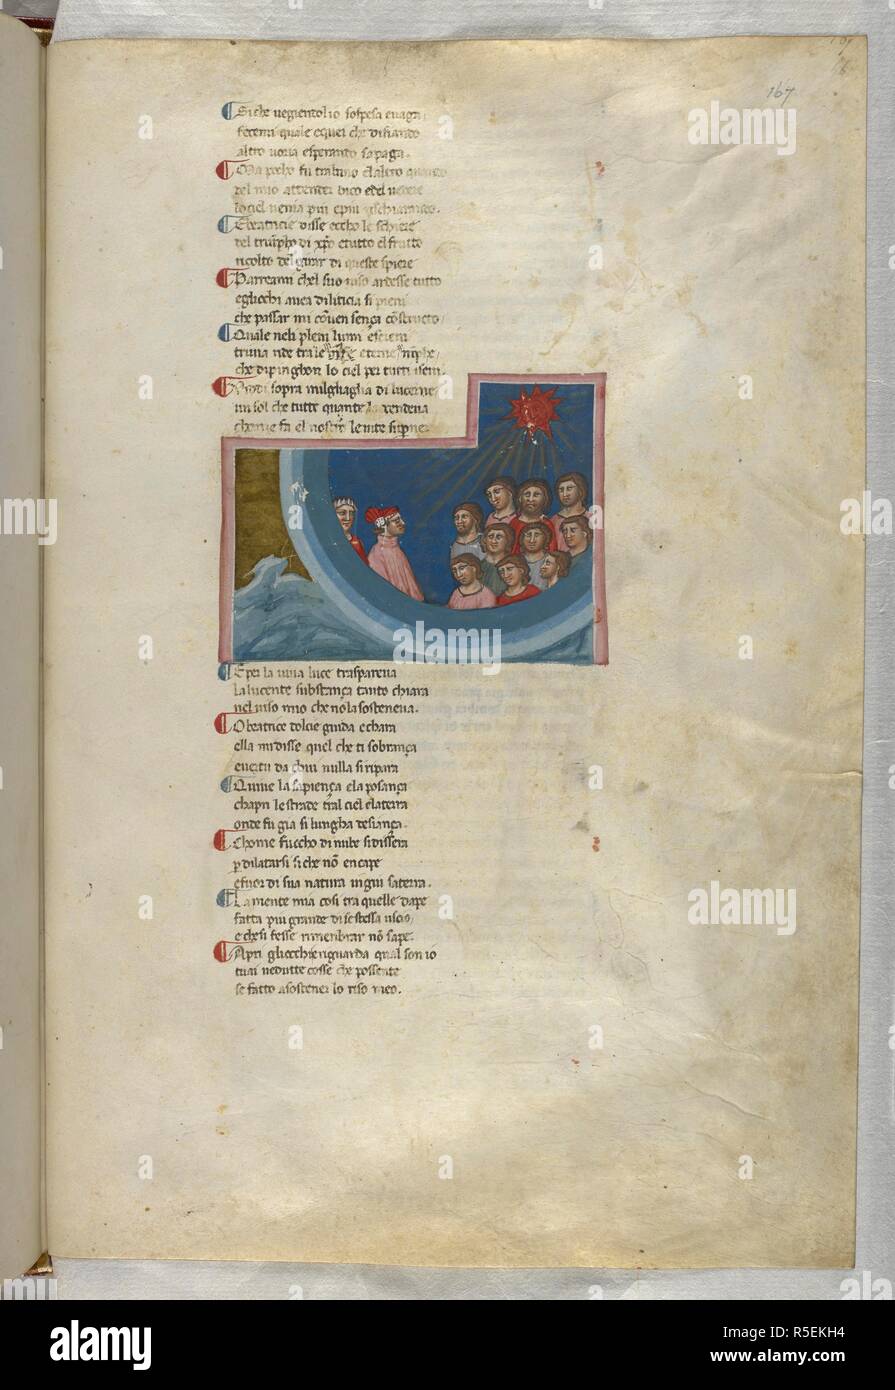 Paradiso : Dante and Beatrice see the members of the triumphant Church. Dante Alighieri, Divina Commedia ( The Divine Comedy ), with a commentary in Latin. 1st half of the 14th century. Source: Egerton 943, f.167. Language: Italian, Latin. Stock Photo